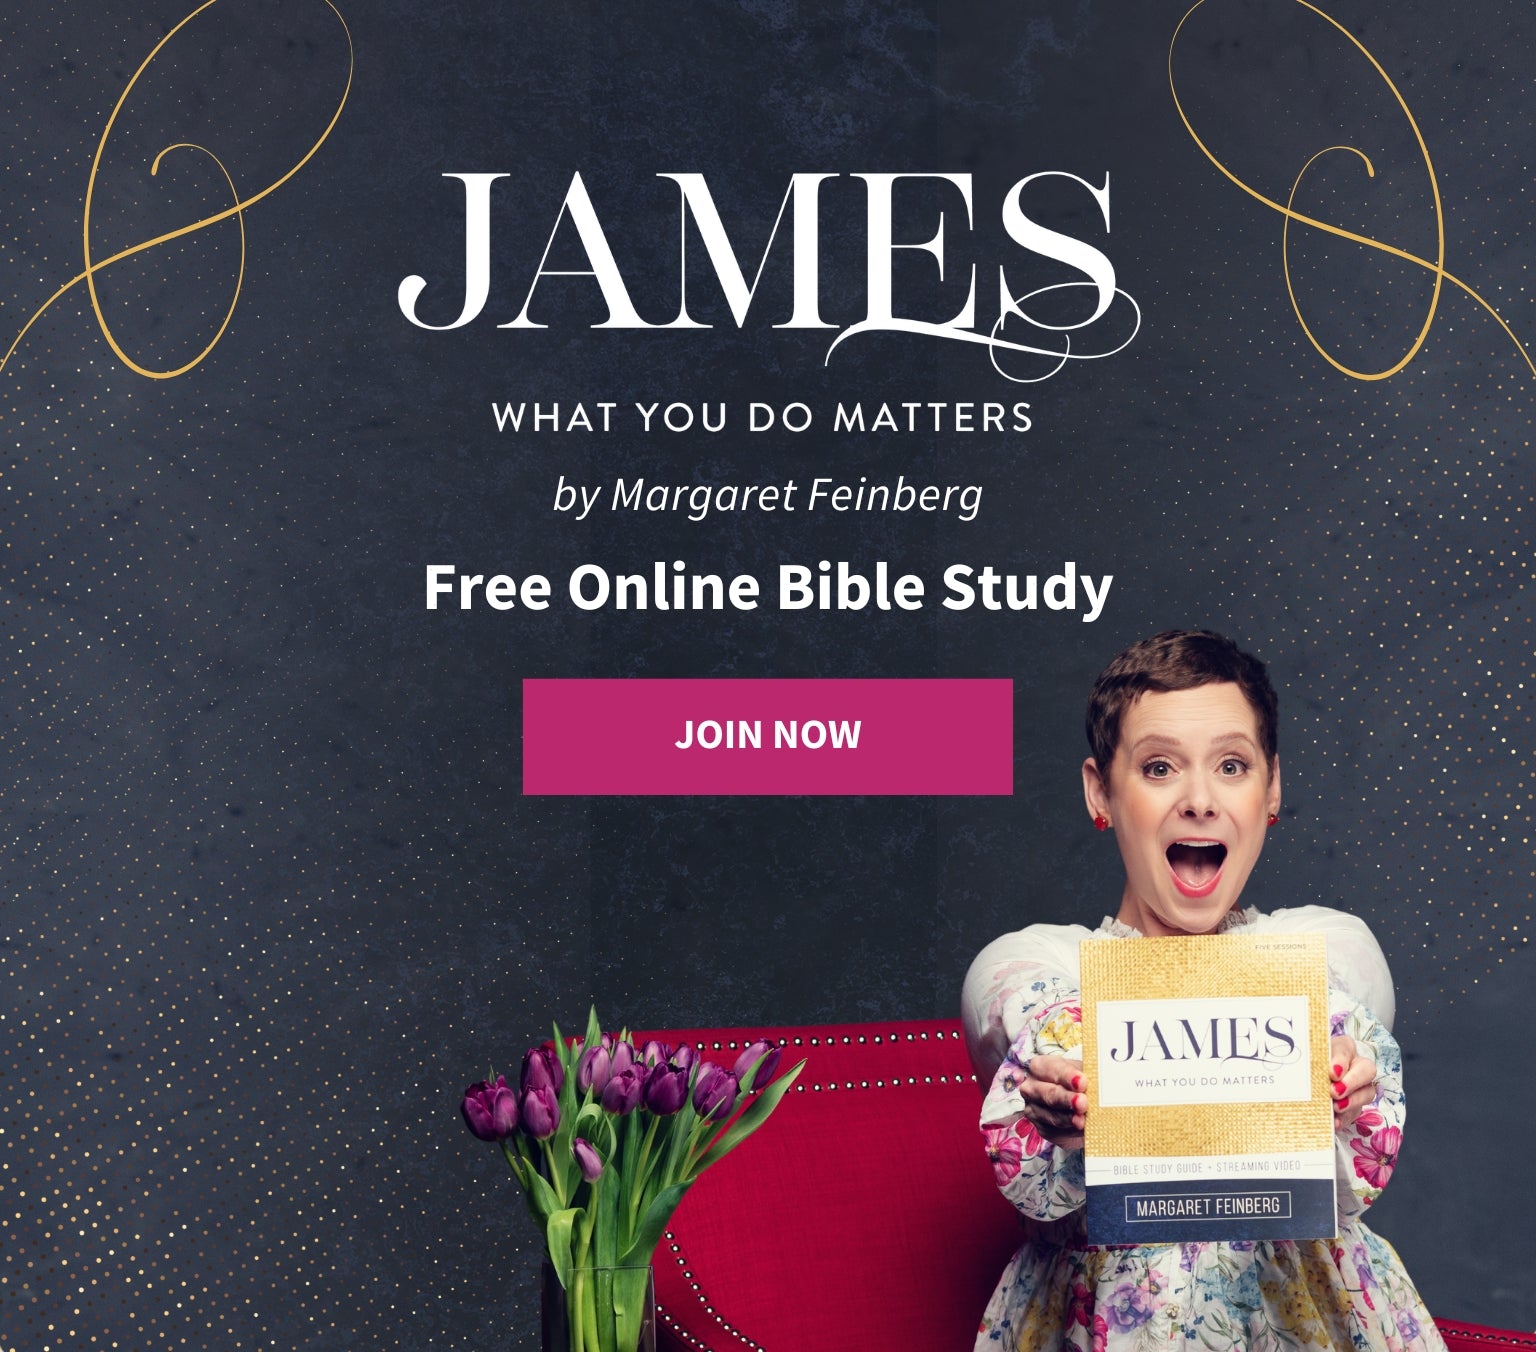 Free Online Bible Study - James by Margaret Feinberg